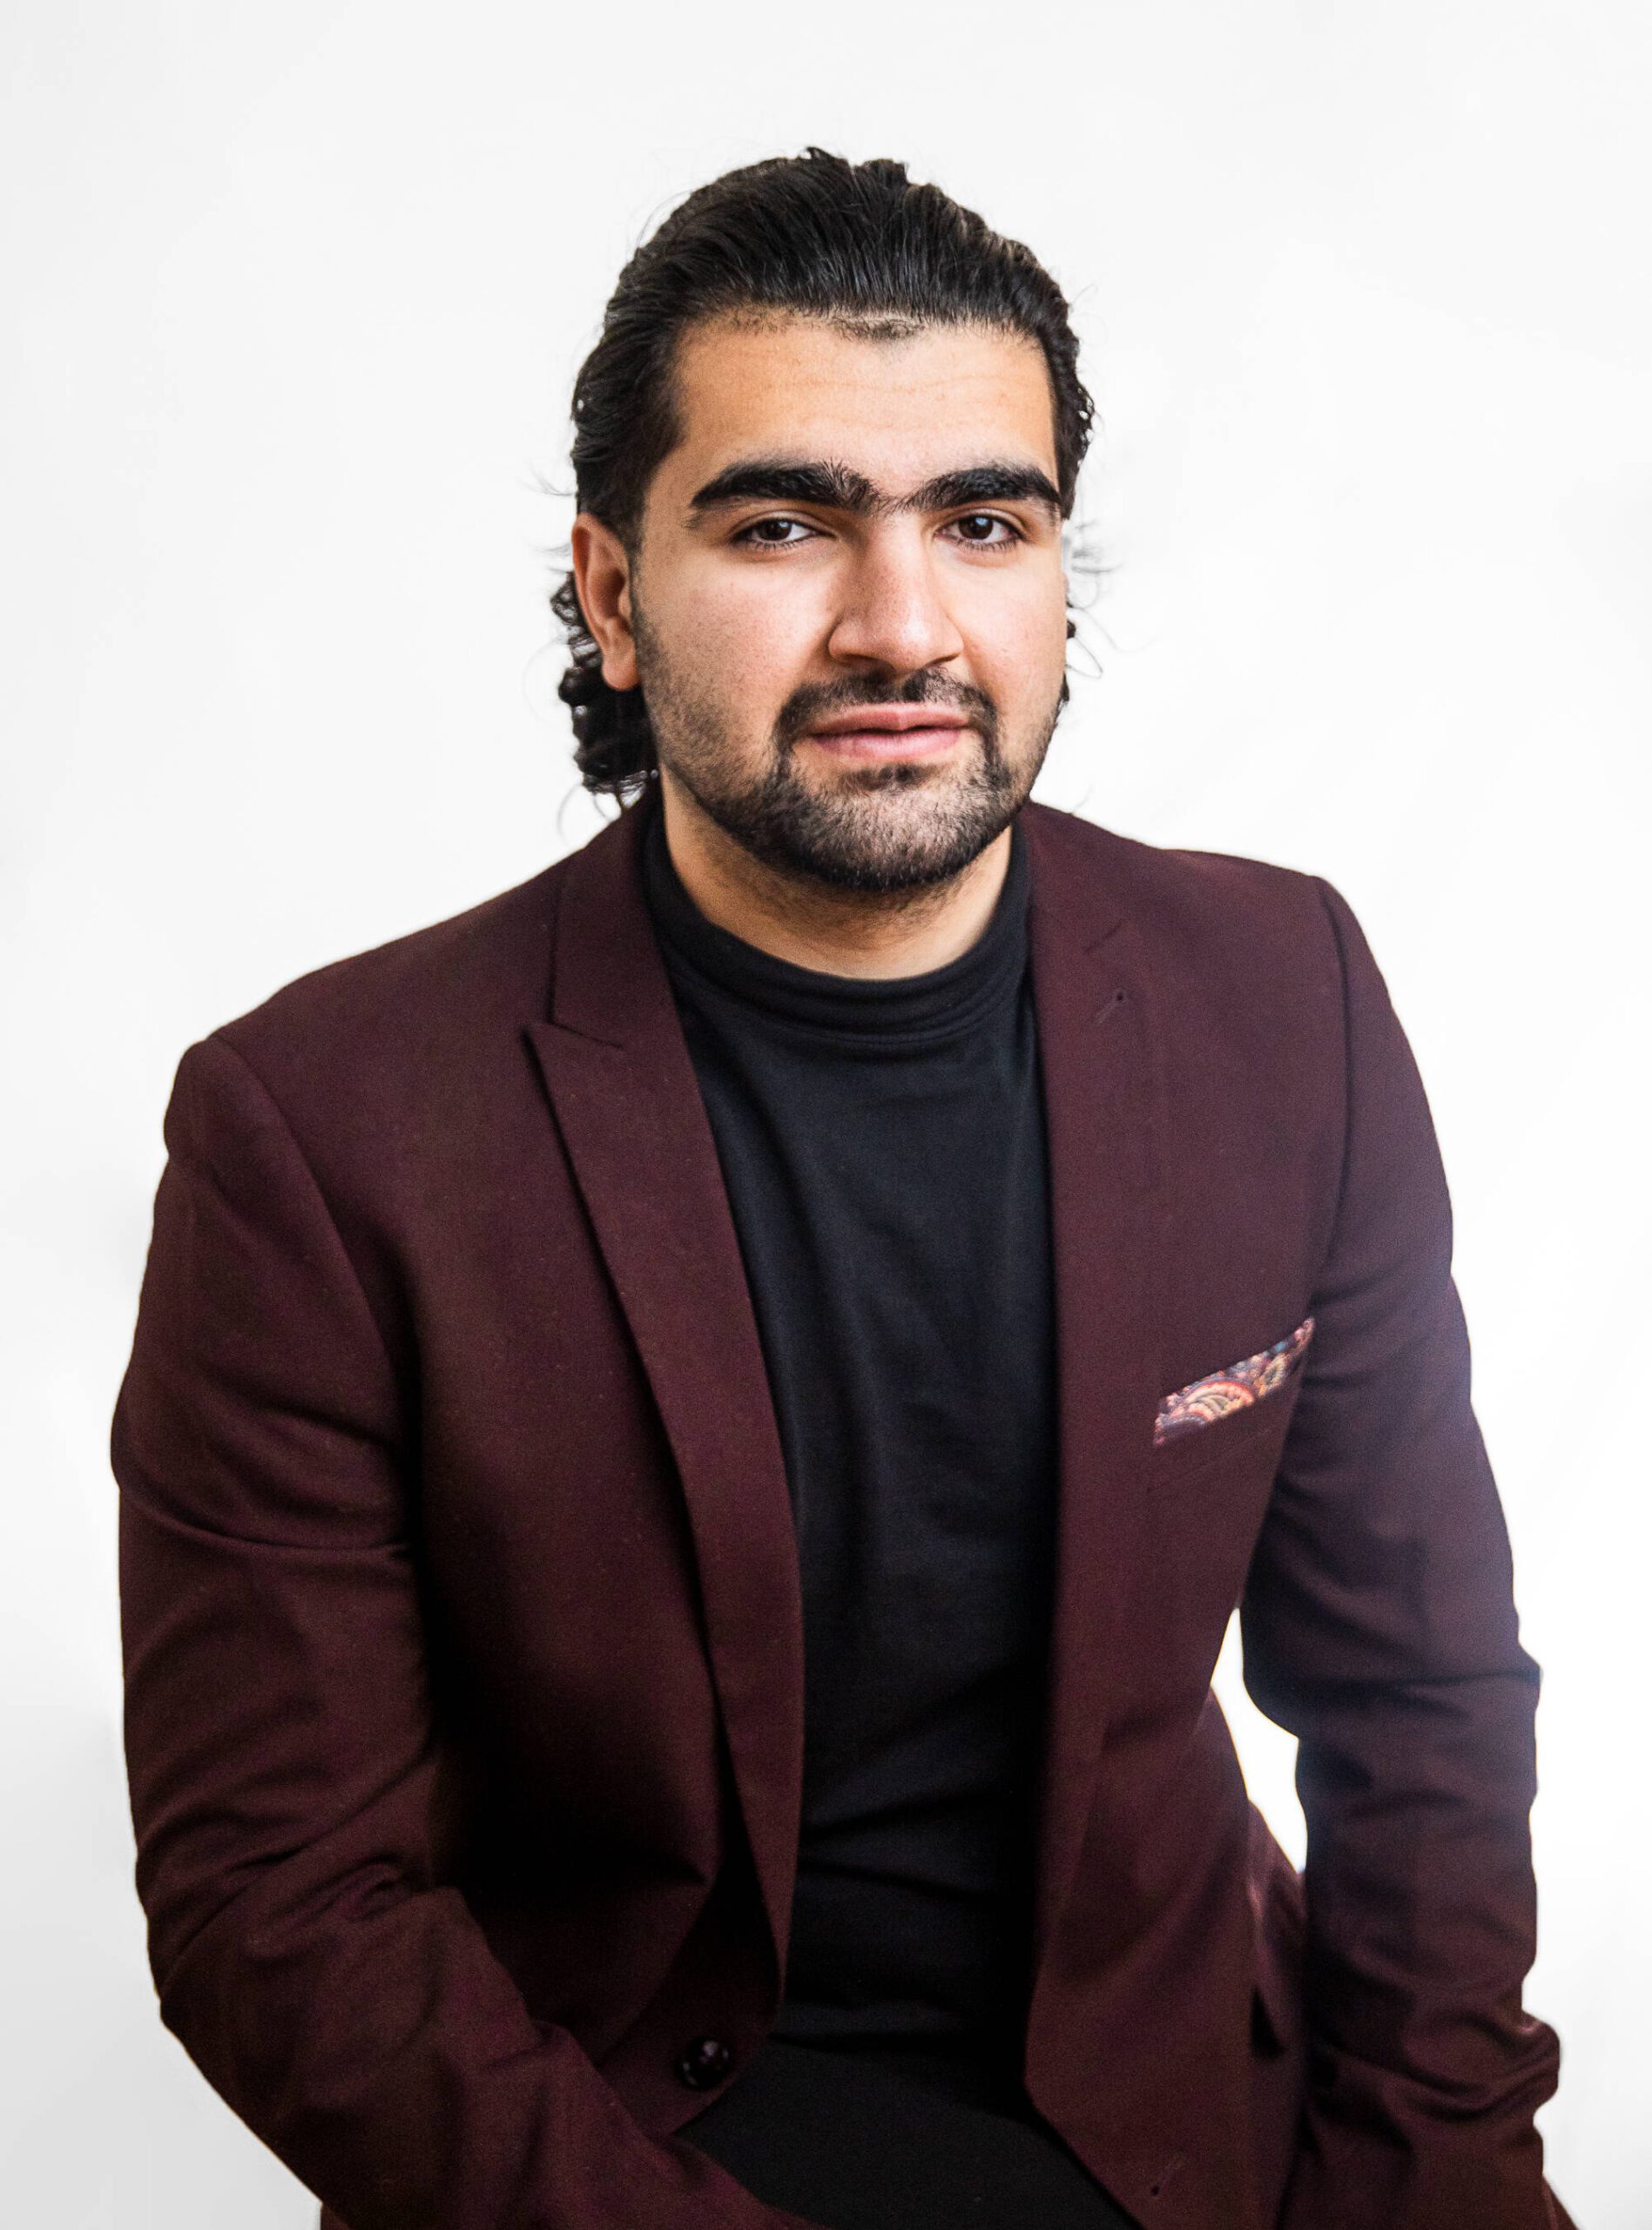 Ahmad Hilal Abid, founder of House of Wisdom at Edmonds College, is an Emerging Leader finalist. (Olivia Vanni / The Herald)